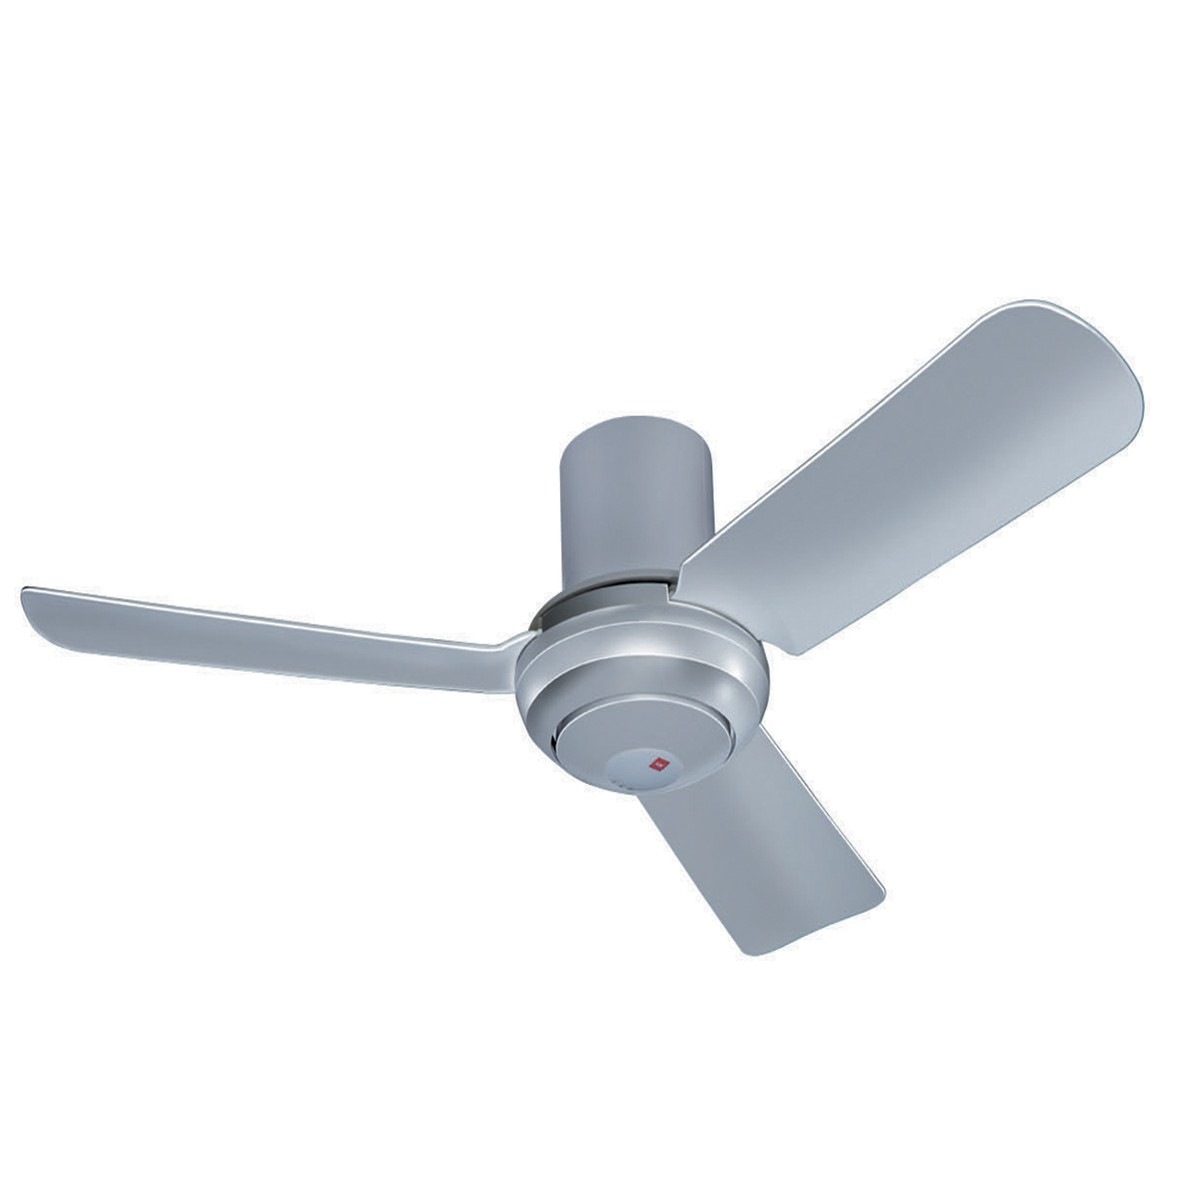 Kdk 44 Ceiling Fan For Hdb With Remote M11su Fans Ventilation Air Quality Horme Singapore